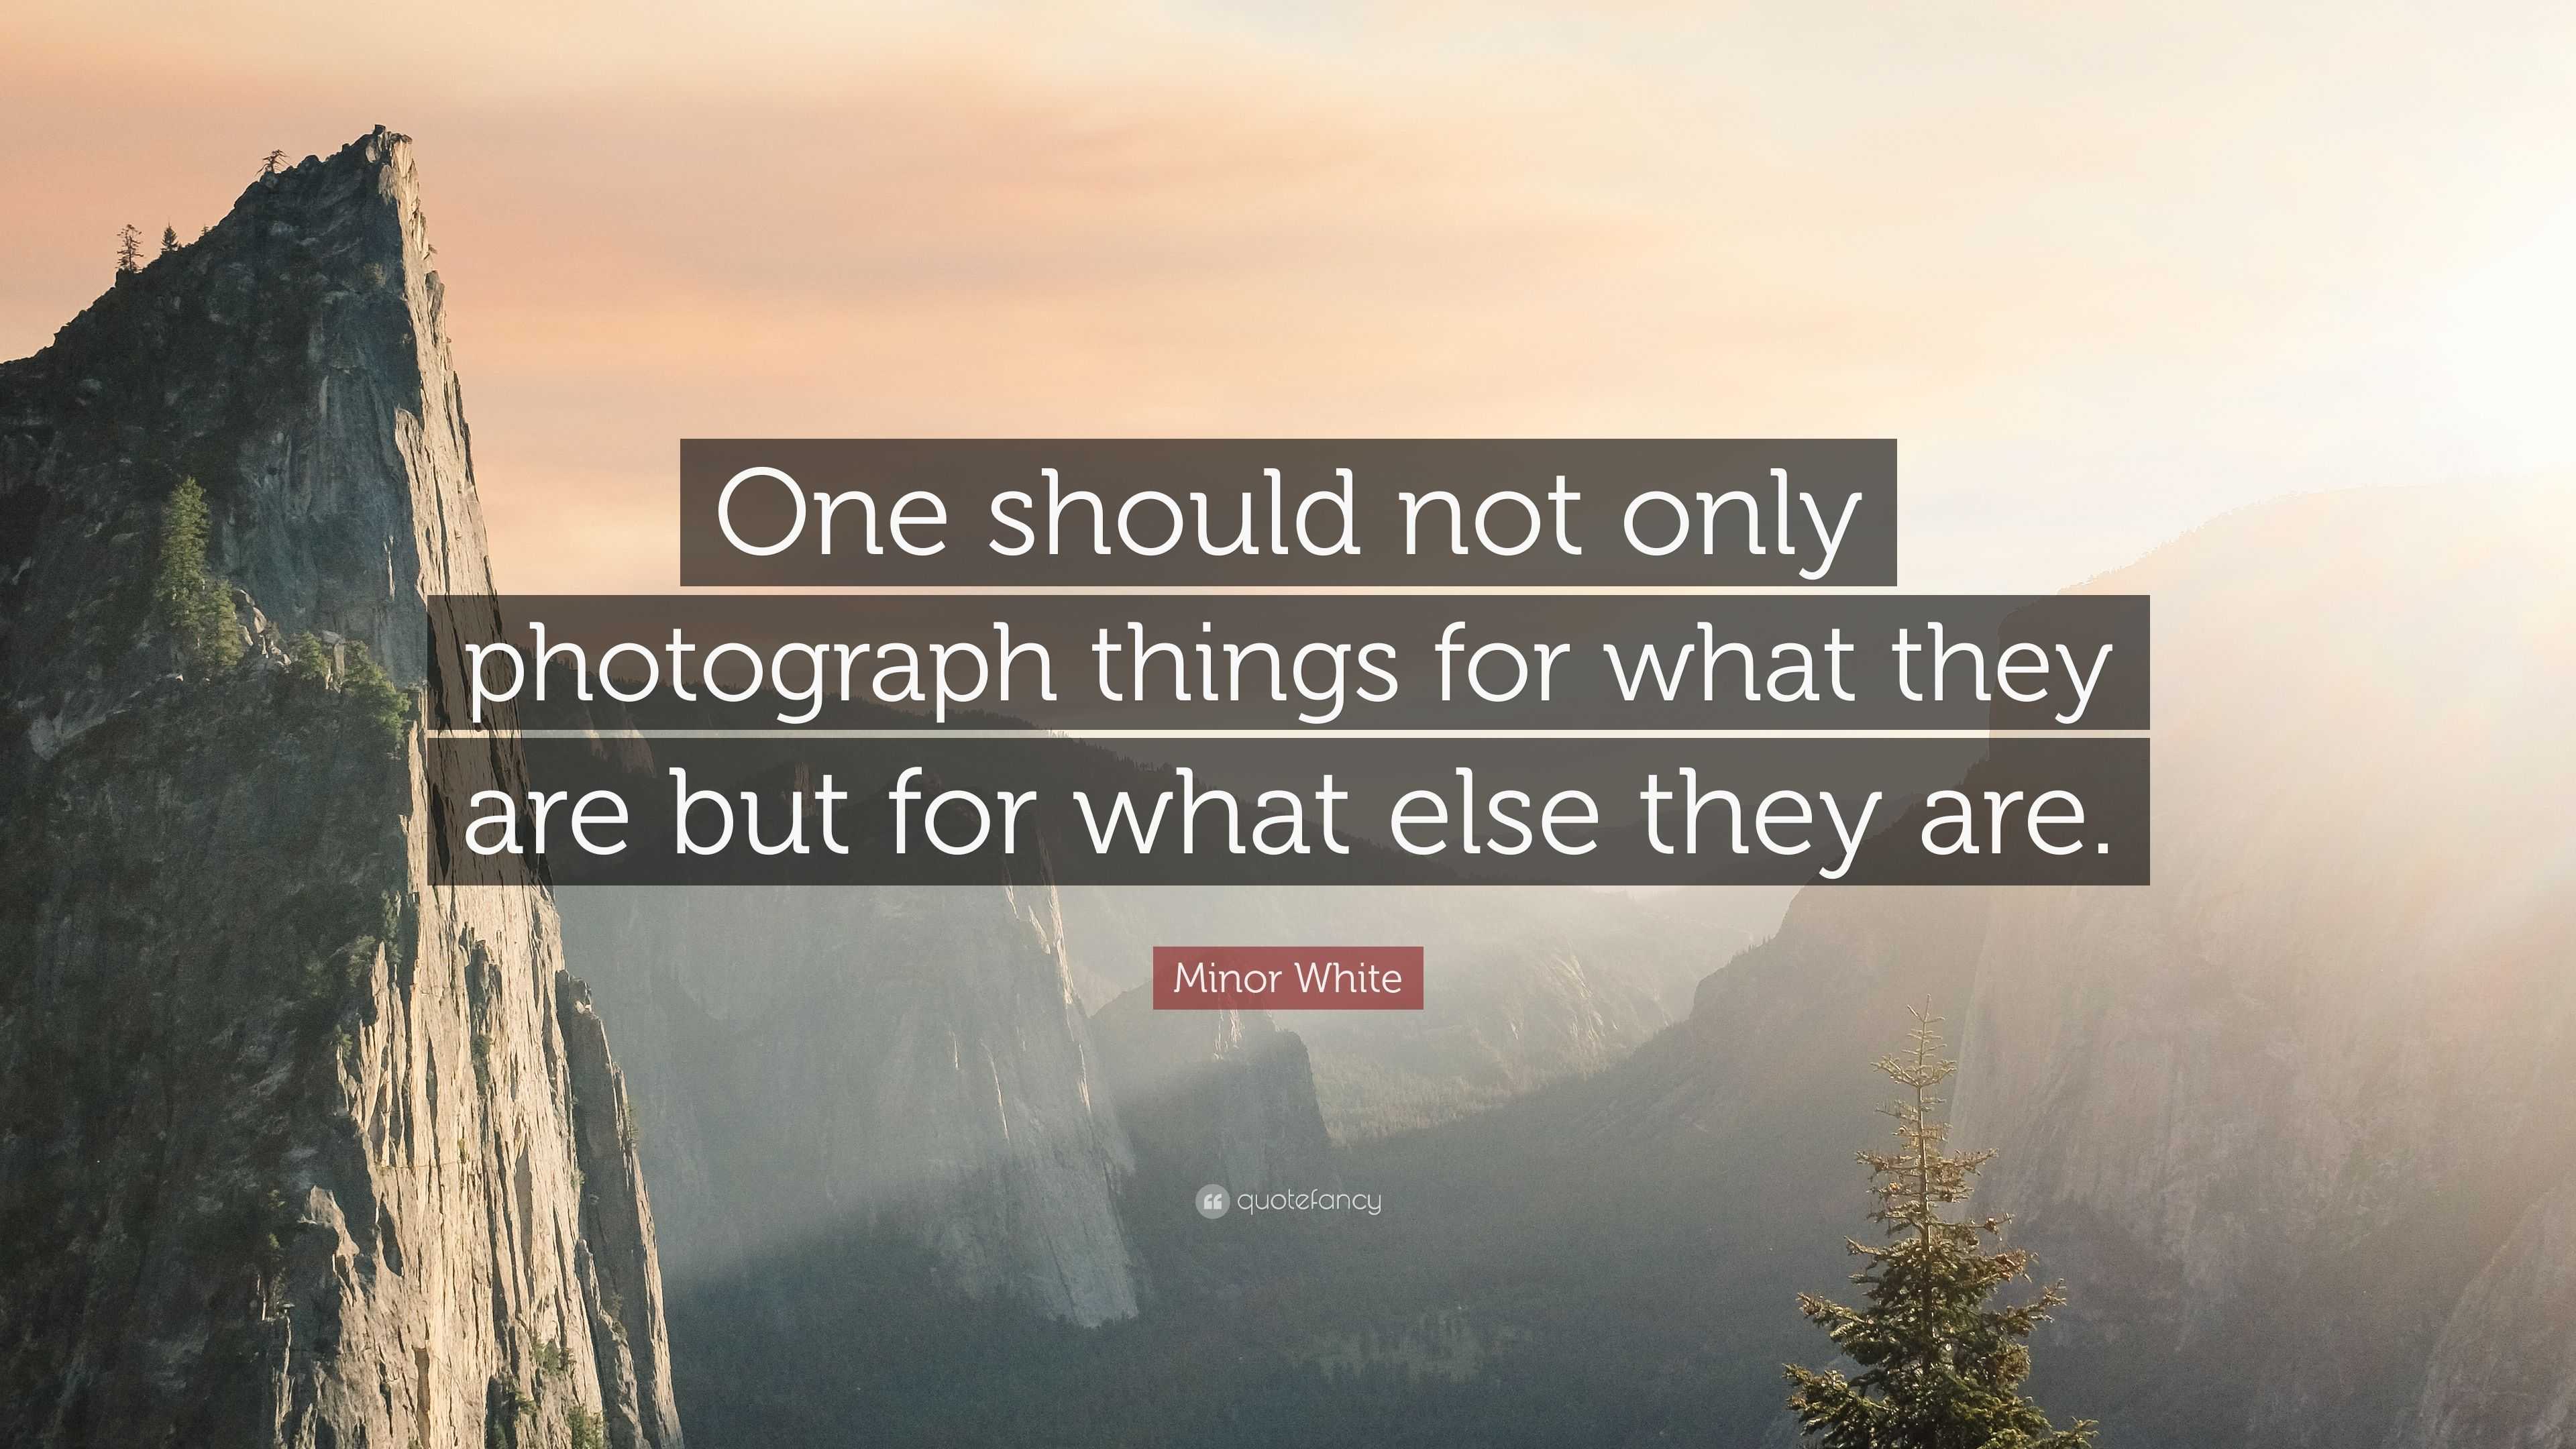 Minor White Quote: “One should not only photograph things for what they ...